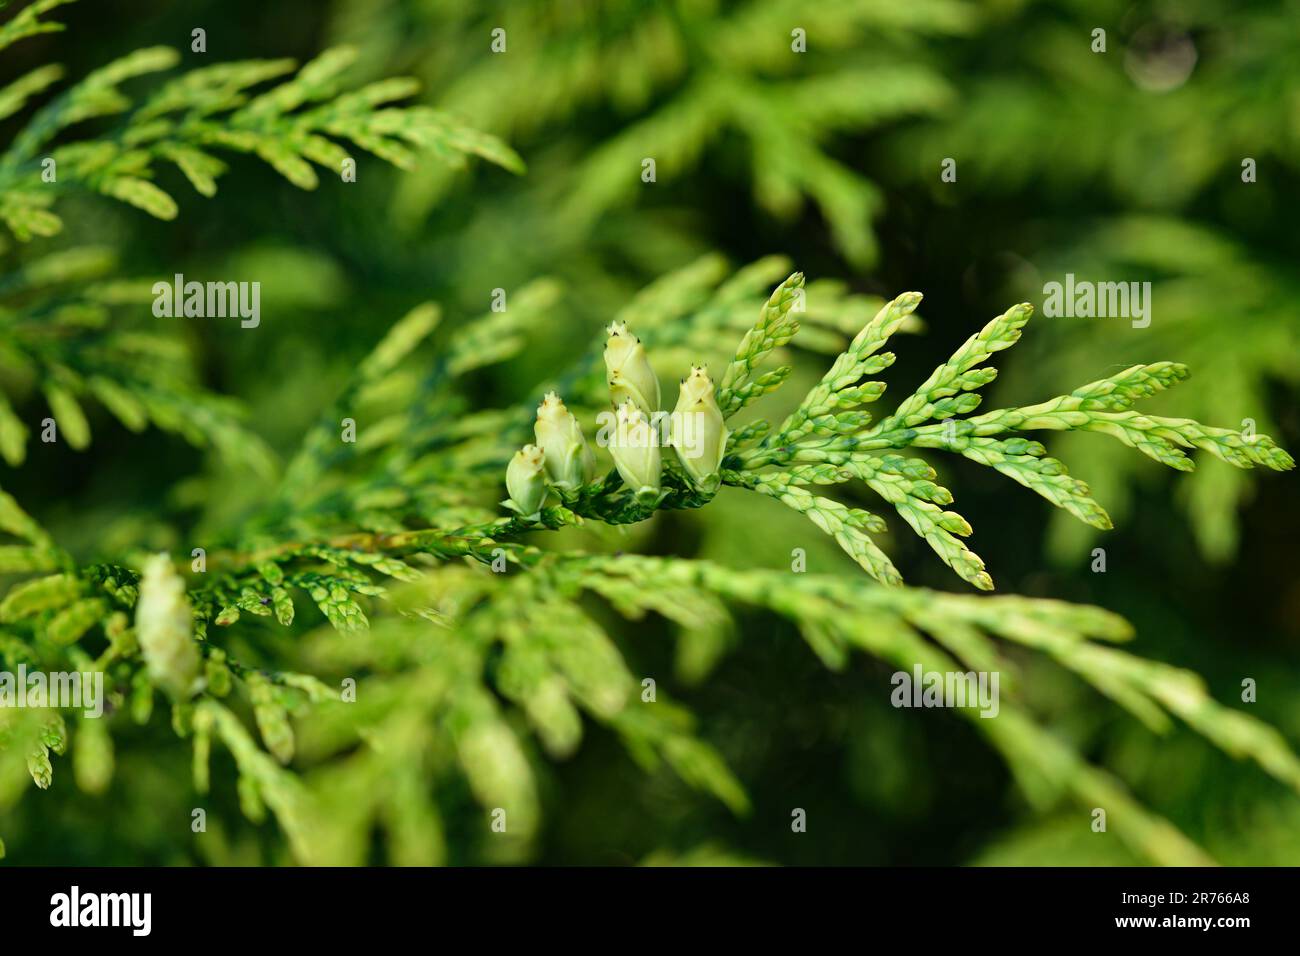 Thuja occidentalis Aurescens. Thuja leaves and branches. Stock Photo